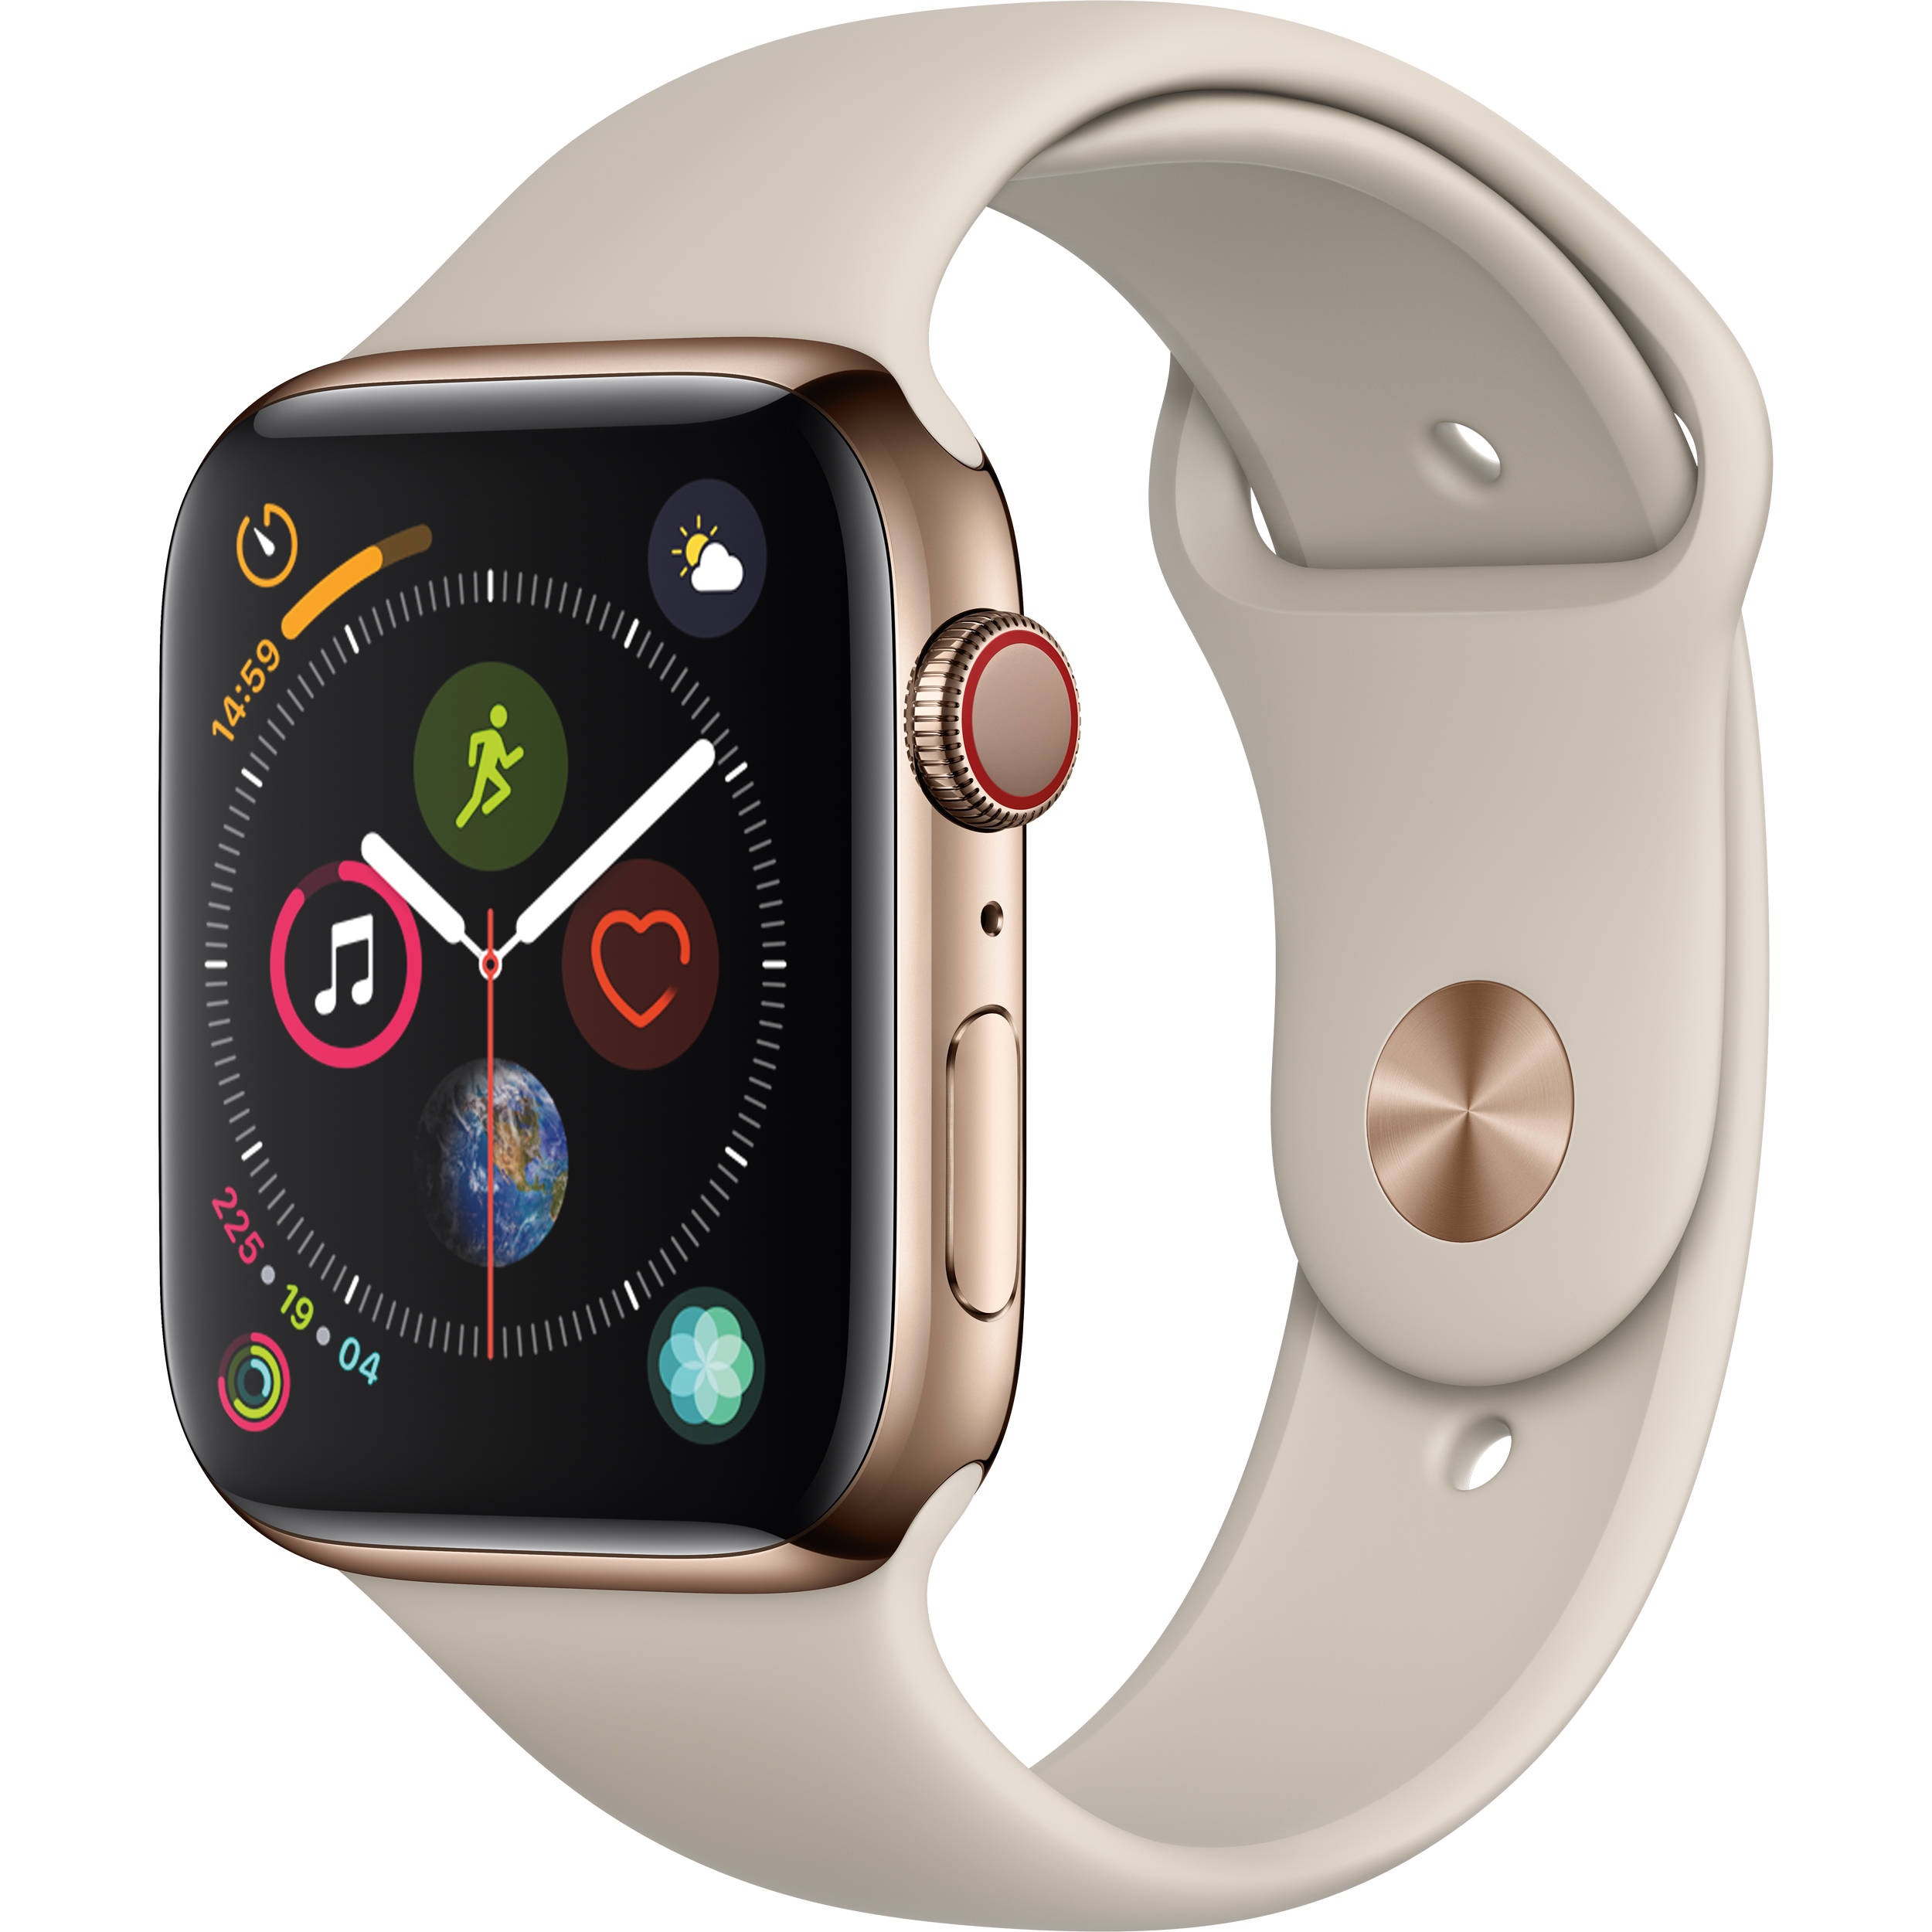 series 4 apple watch without cellular